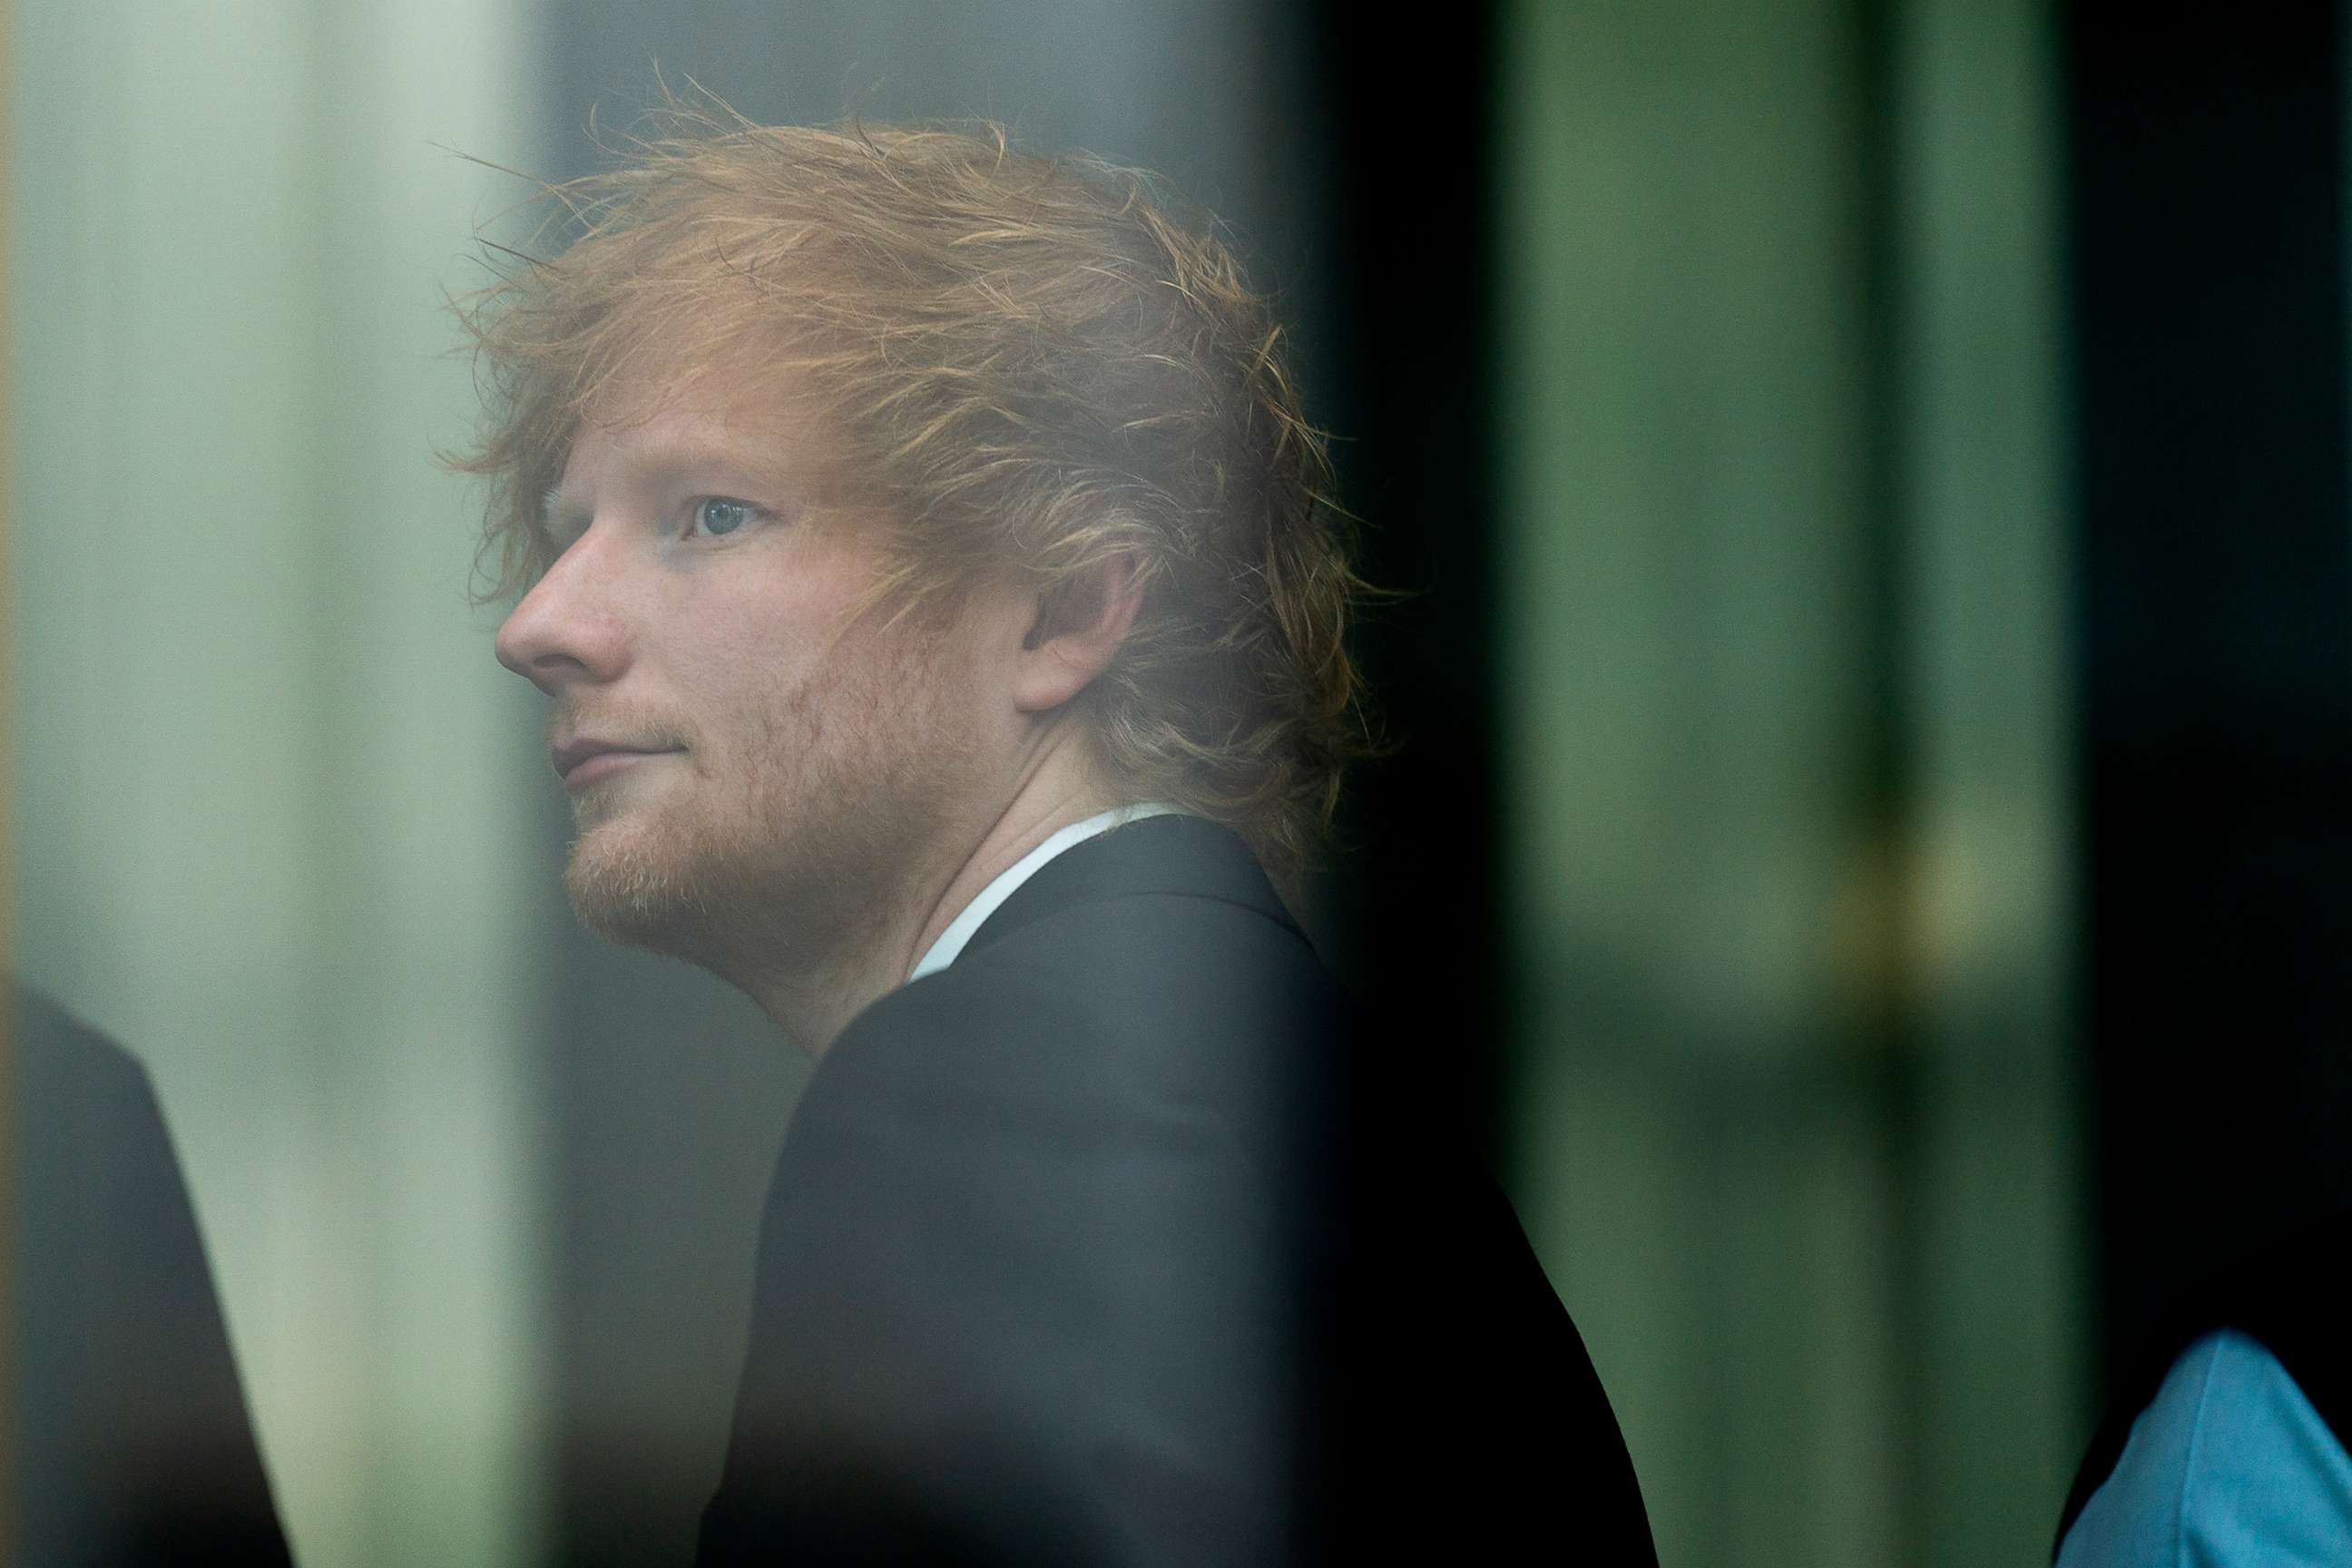 PHOTO: Singer Ed Sheeran arrives at the Manhattan federal court for his copyright trial in New York City, on May 2, 2023.